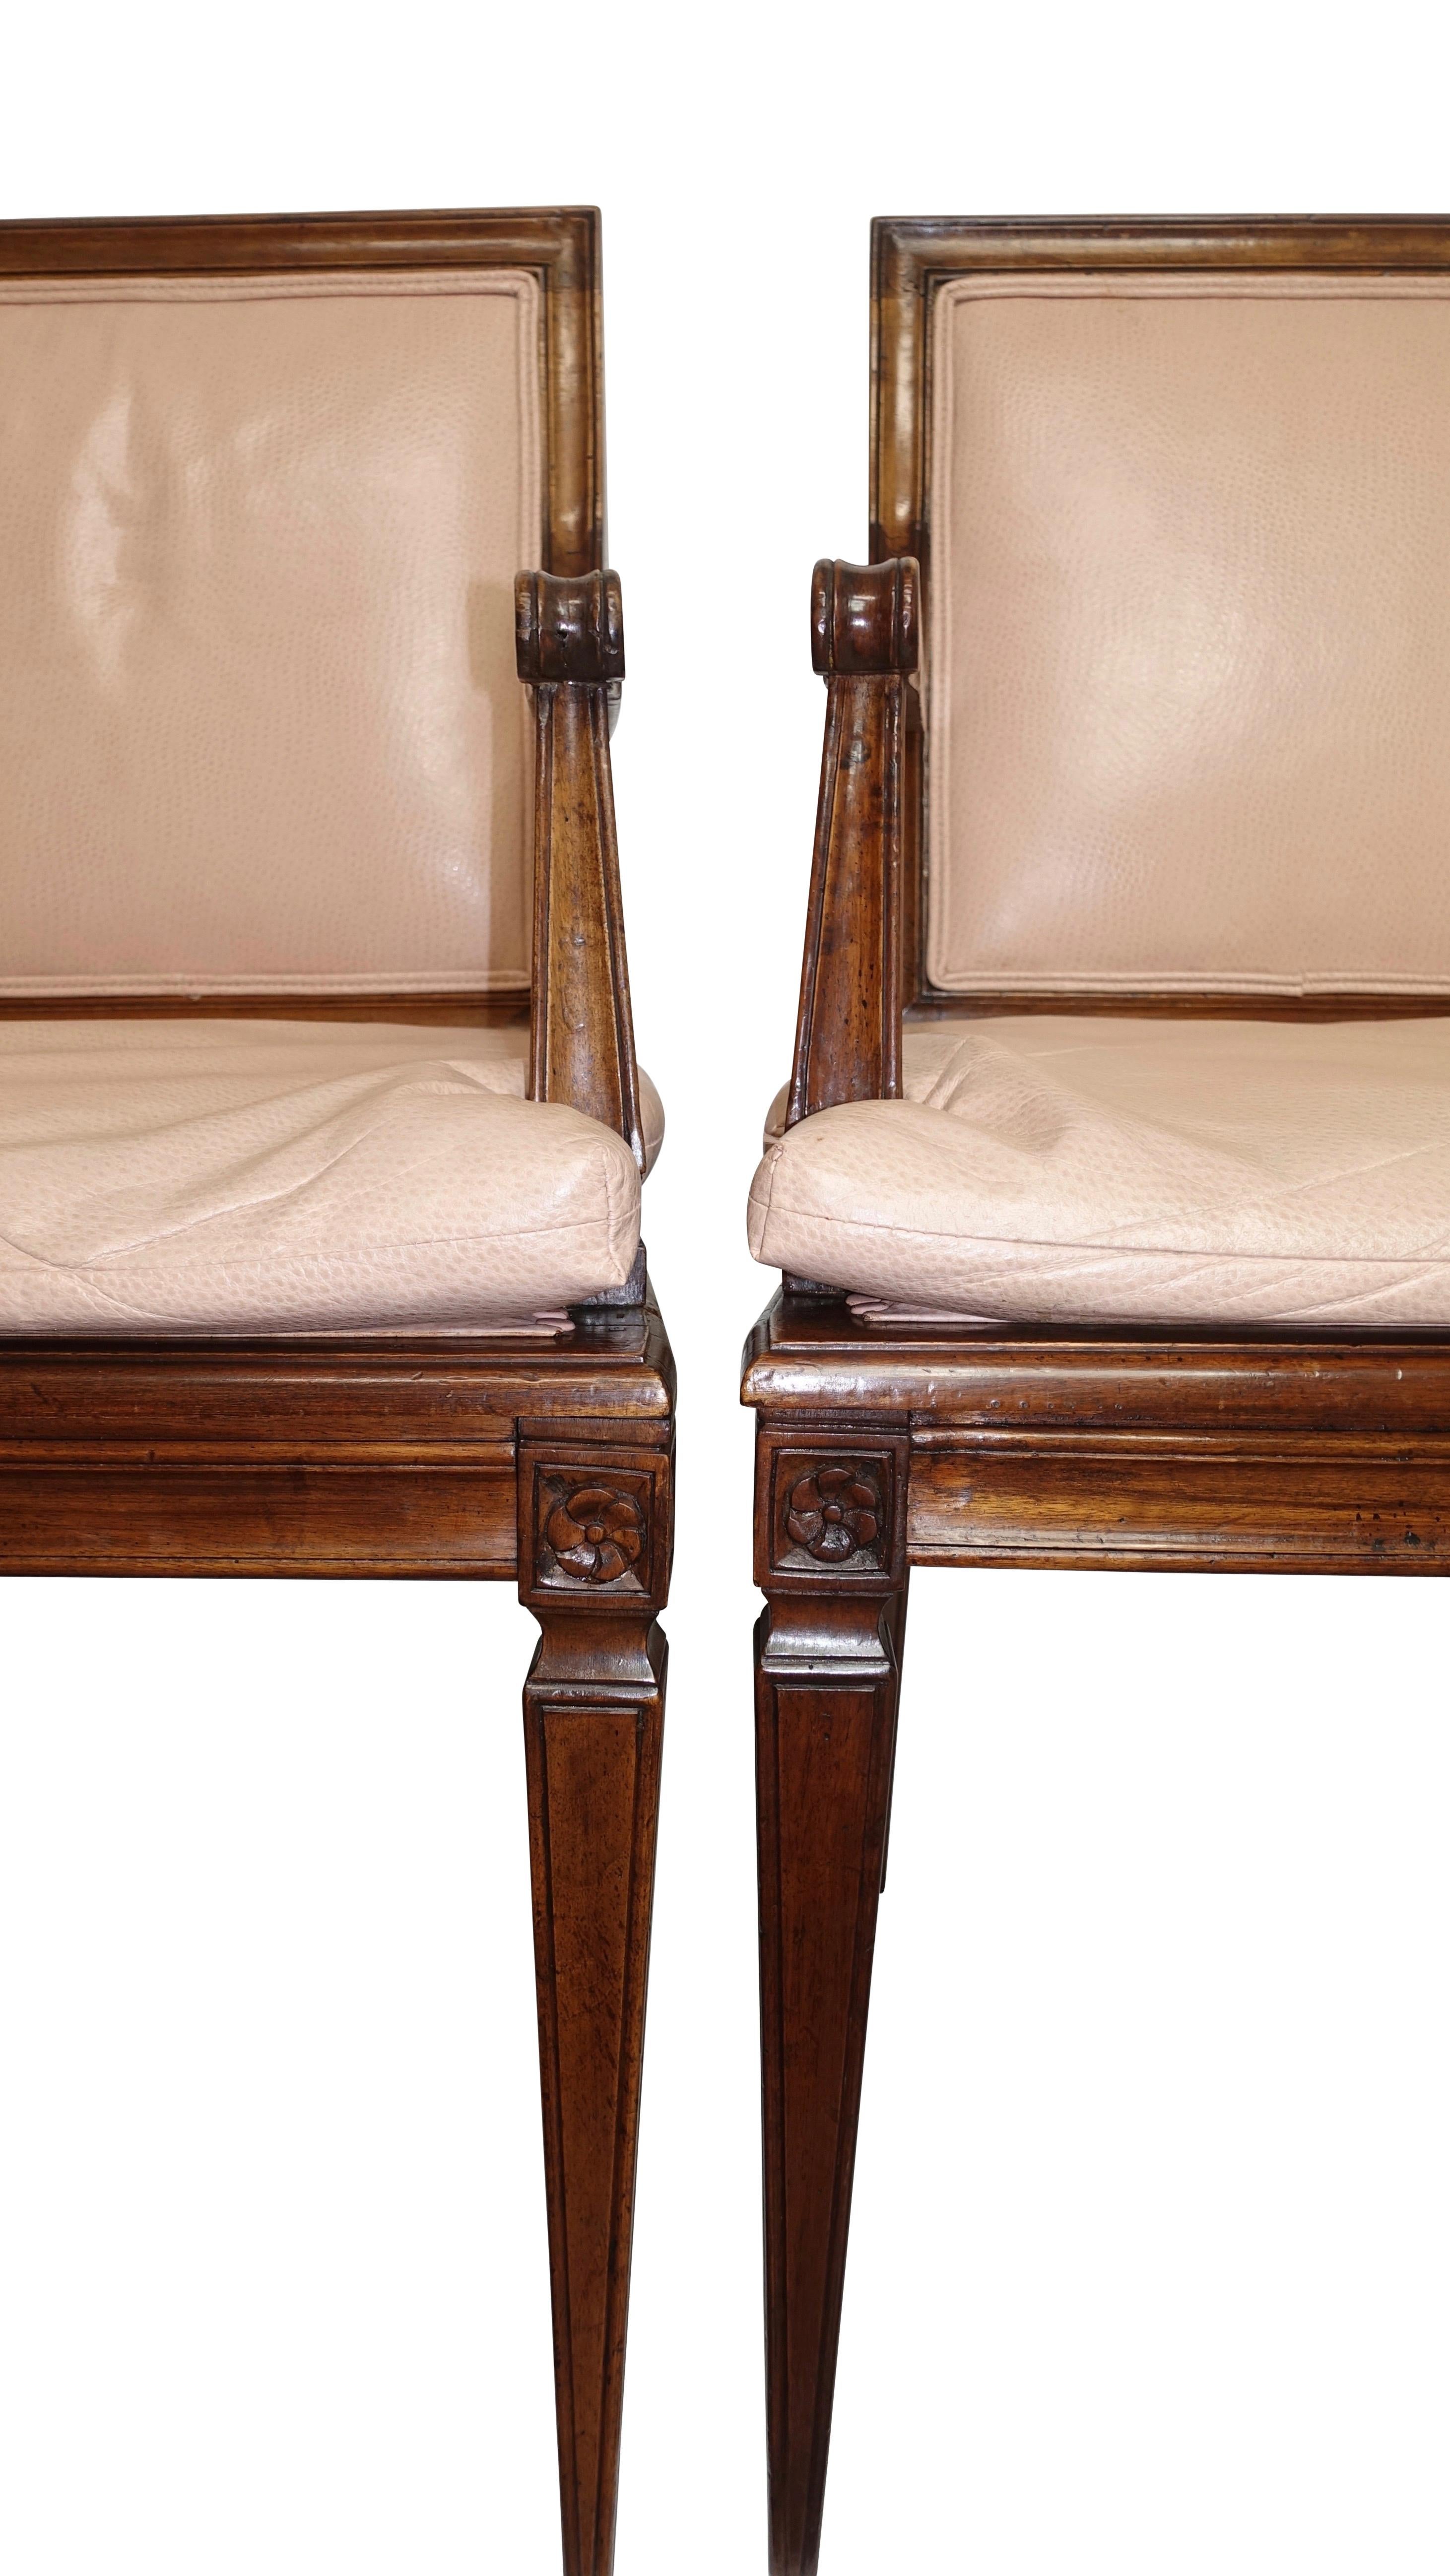 Set of Four Neoclassical Style Armchairs, Italian, Late 19th-Early 20th Century 1